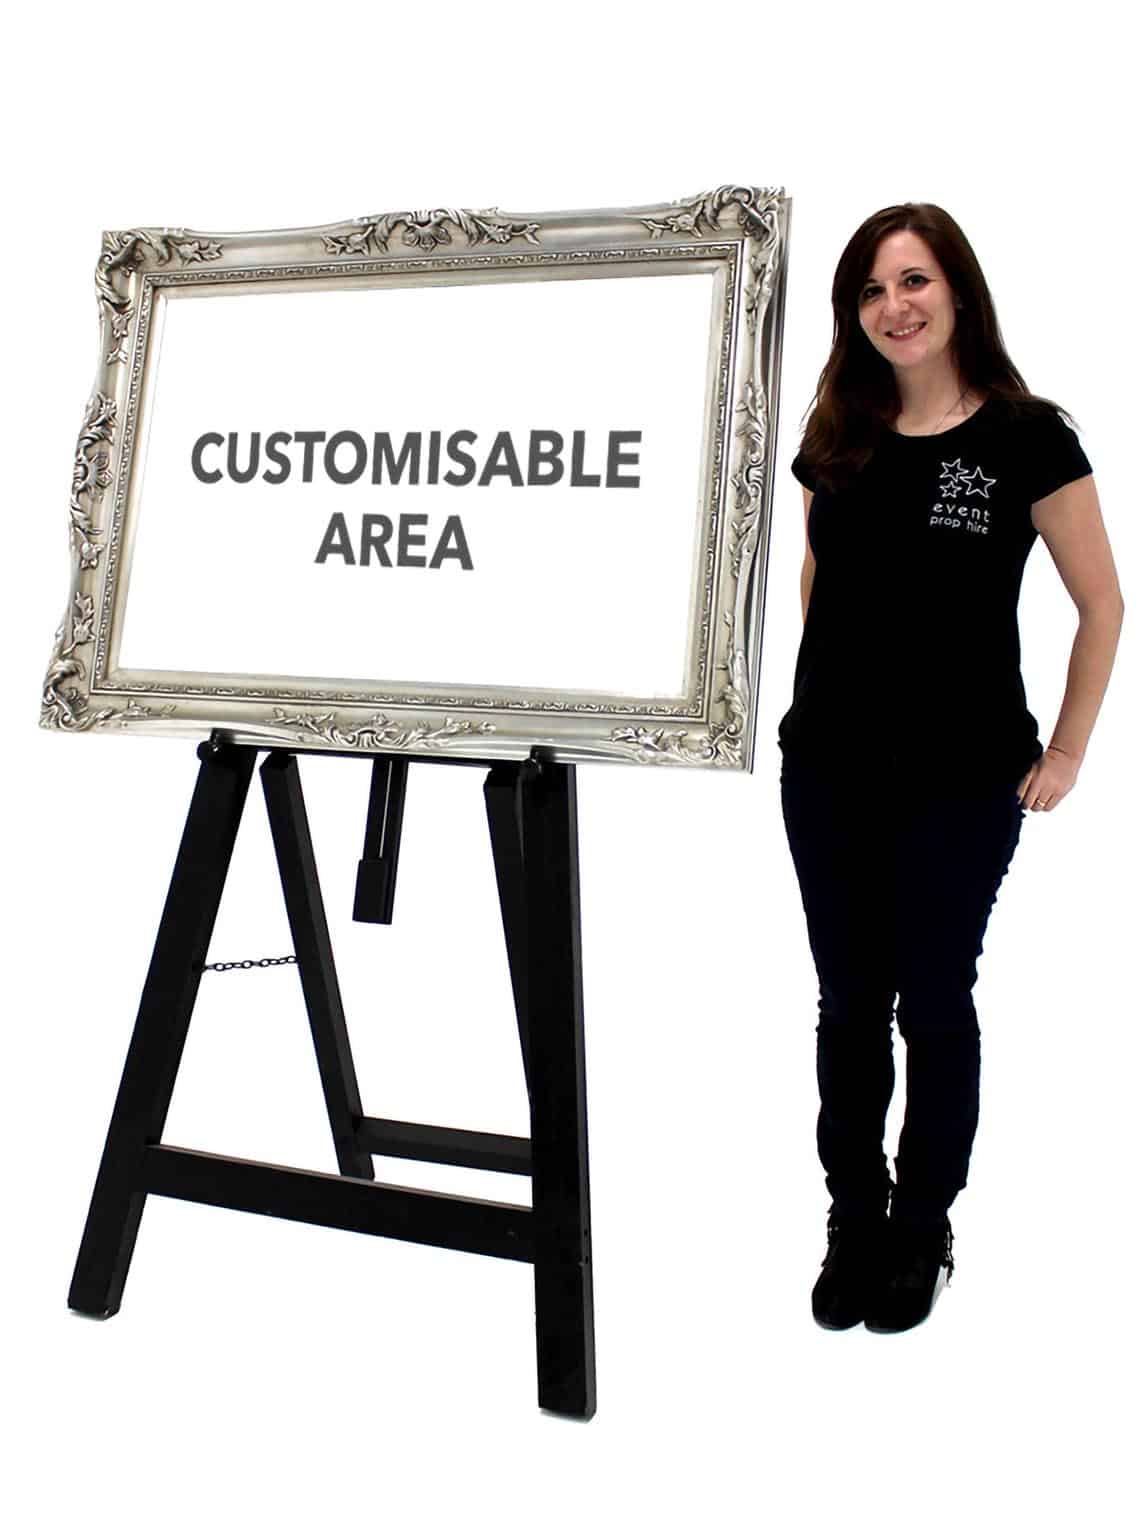 Customised Ornate Frame Sign in Silver on a Black Easel – VIP / Welcome Entrance